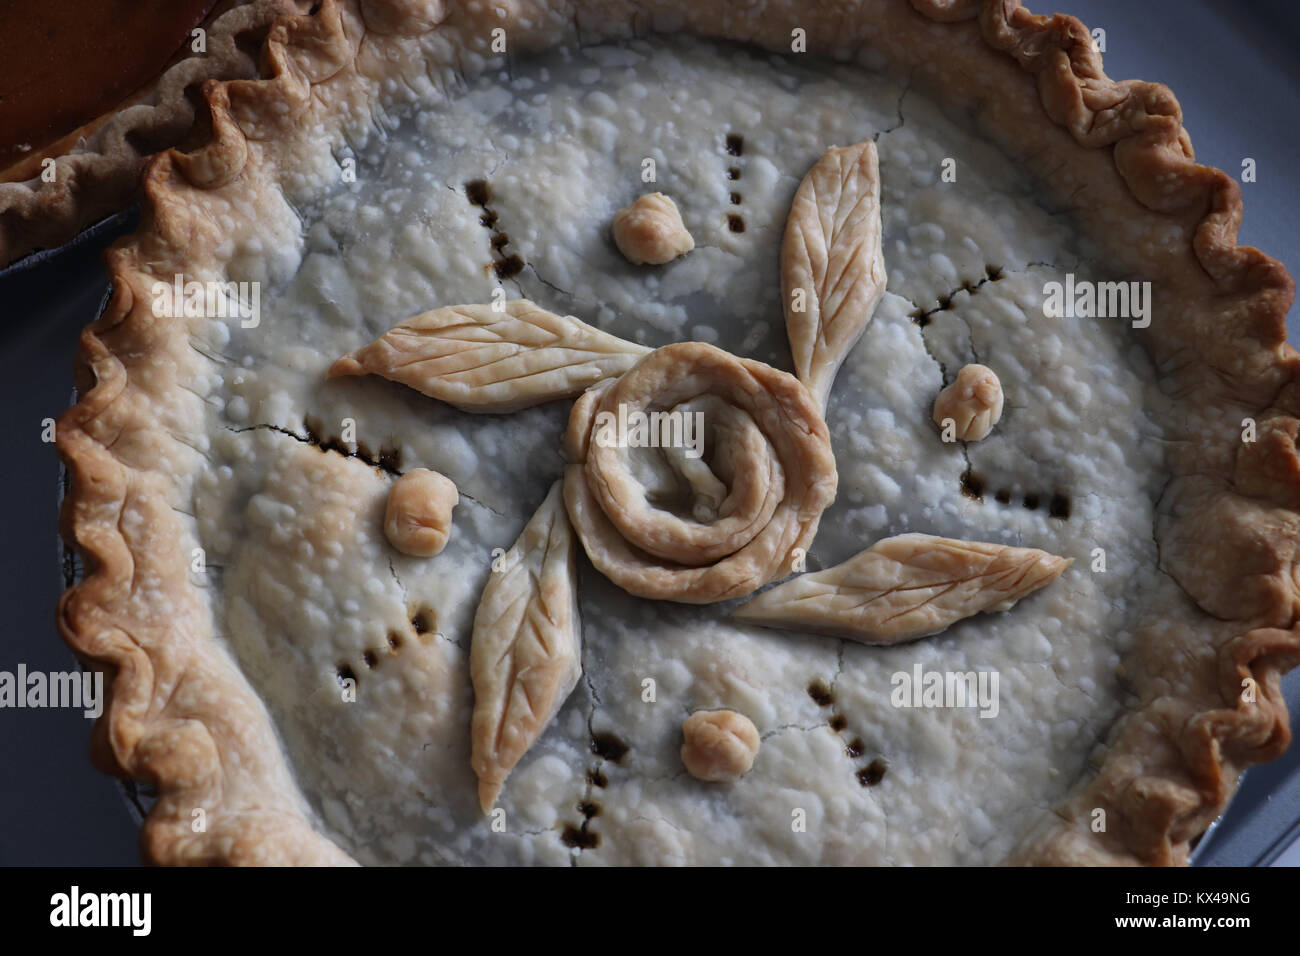 Traditional mincemeat pie with fancy crust and decoration prepared for the Christmas holiday meal.  Rose pattern formed from piecrust, and fluted edge. Stock Photo